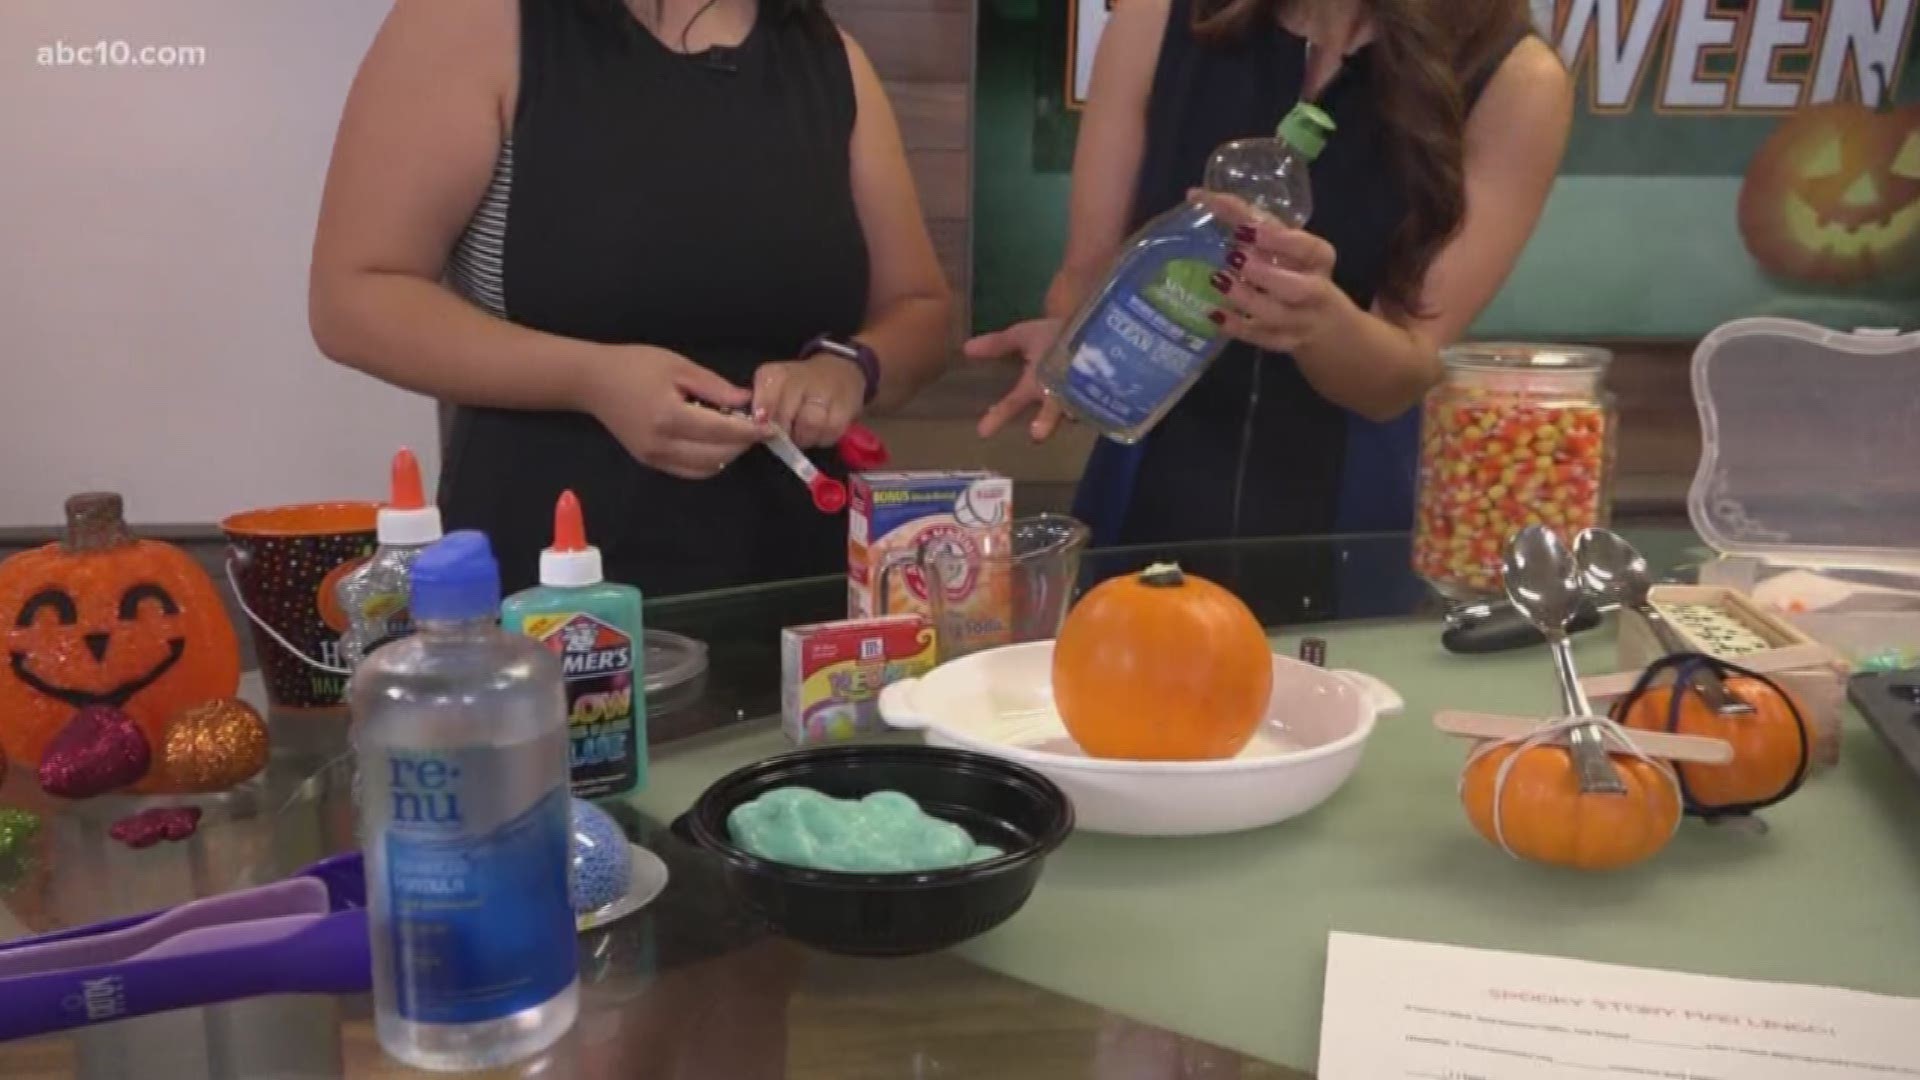 Jennifer Chen Tran, from Best in Class Education Center in Roseville, shows some Halloween-themed learning activities that parents or caregivers can do with their children.